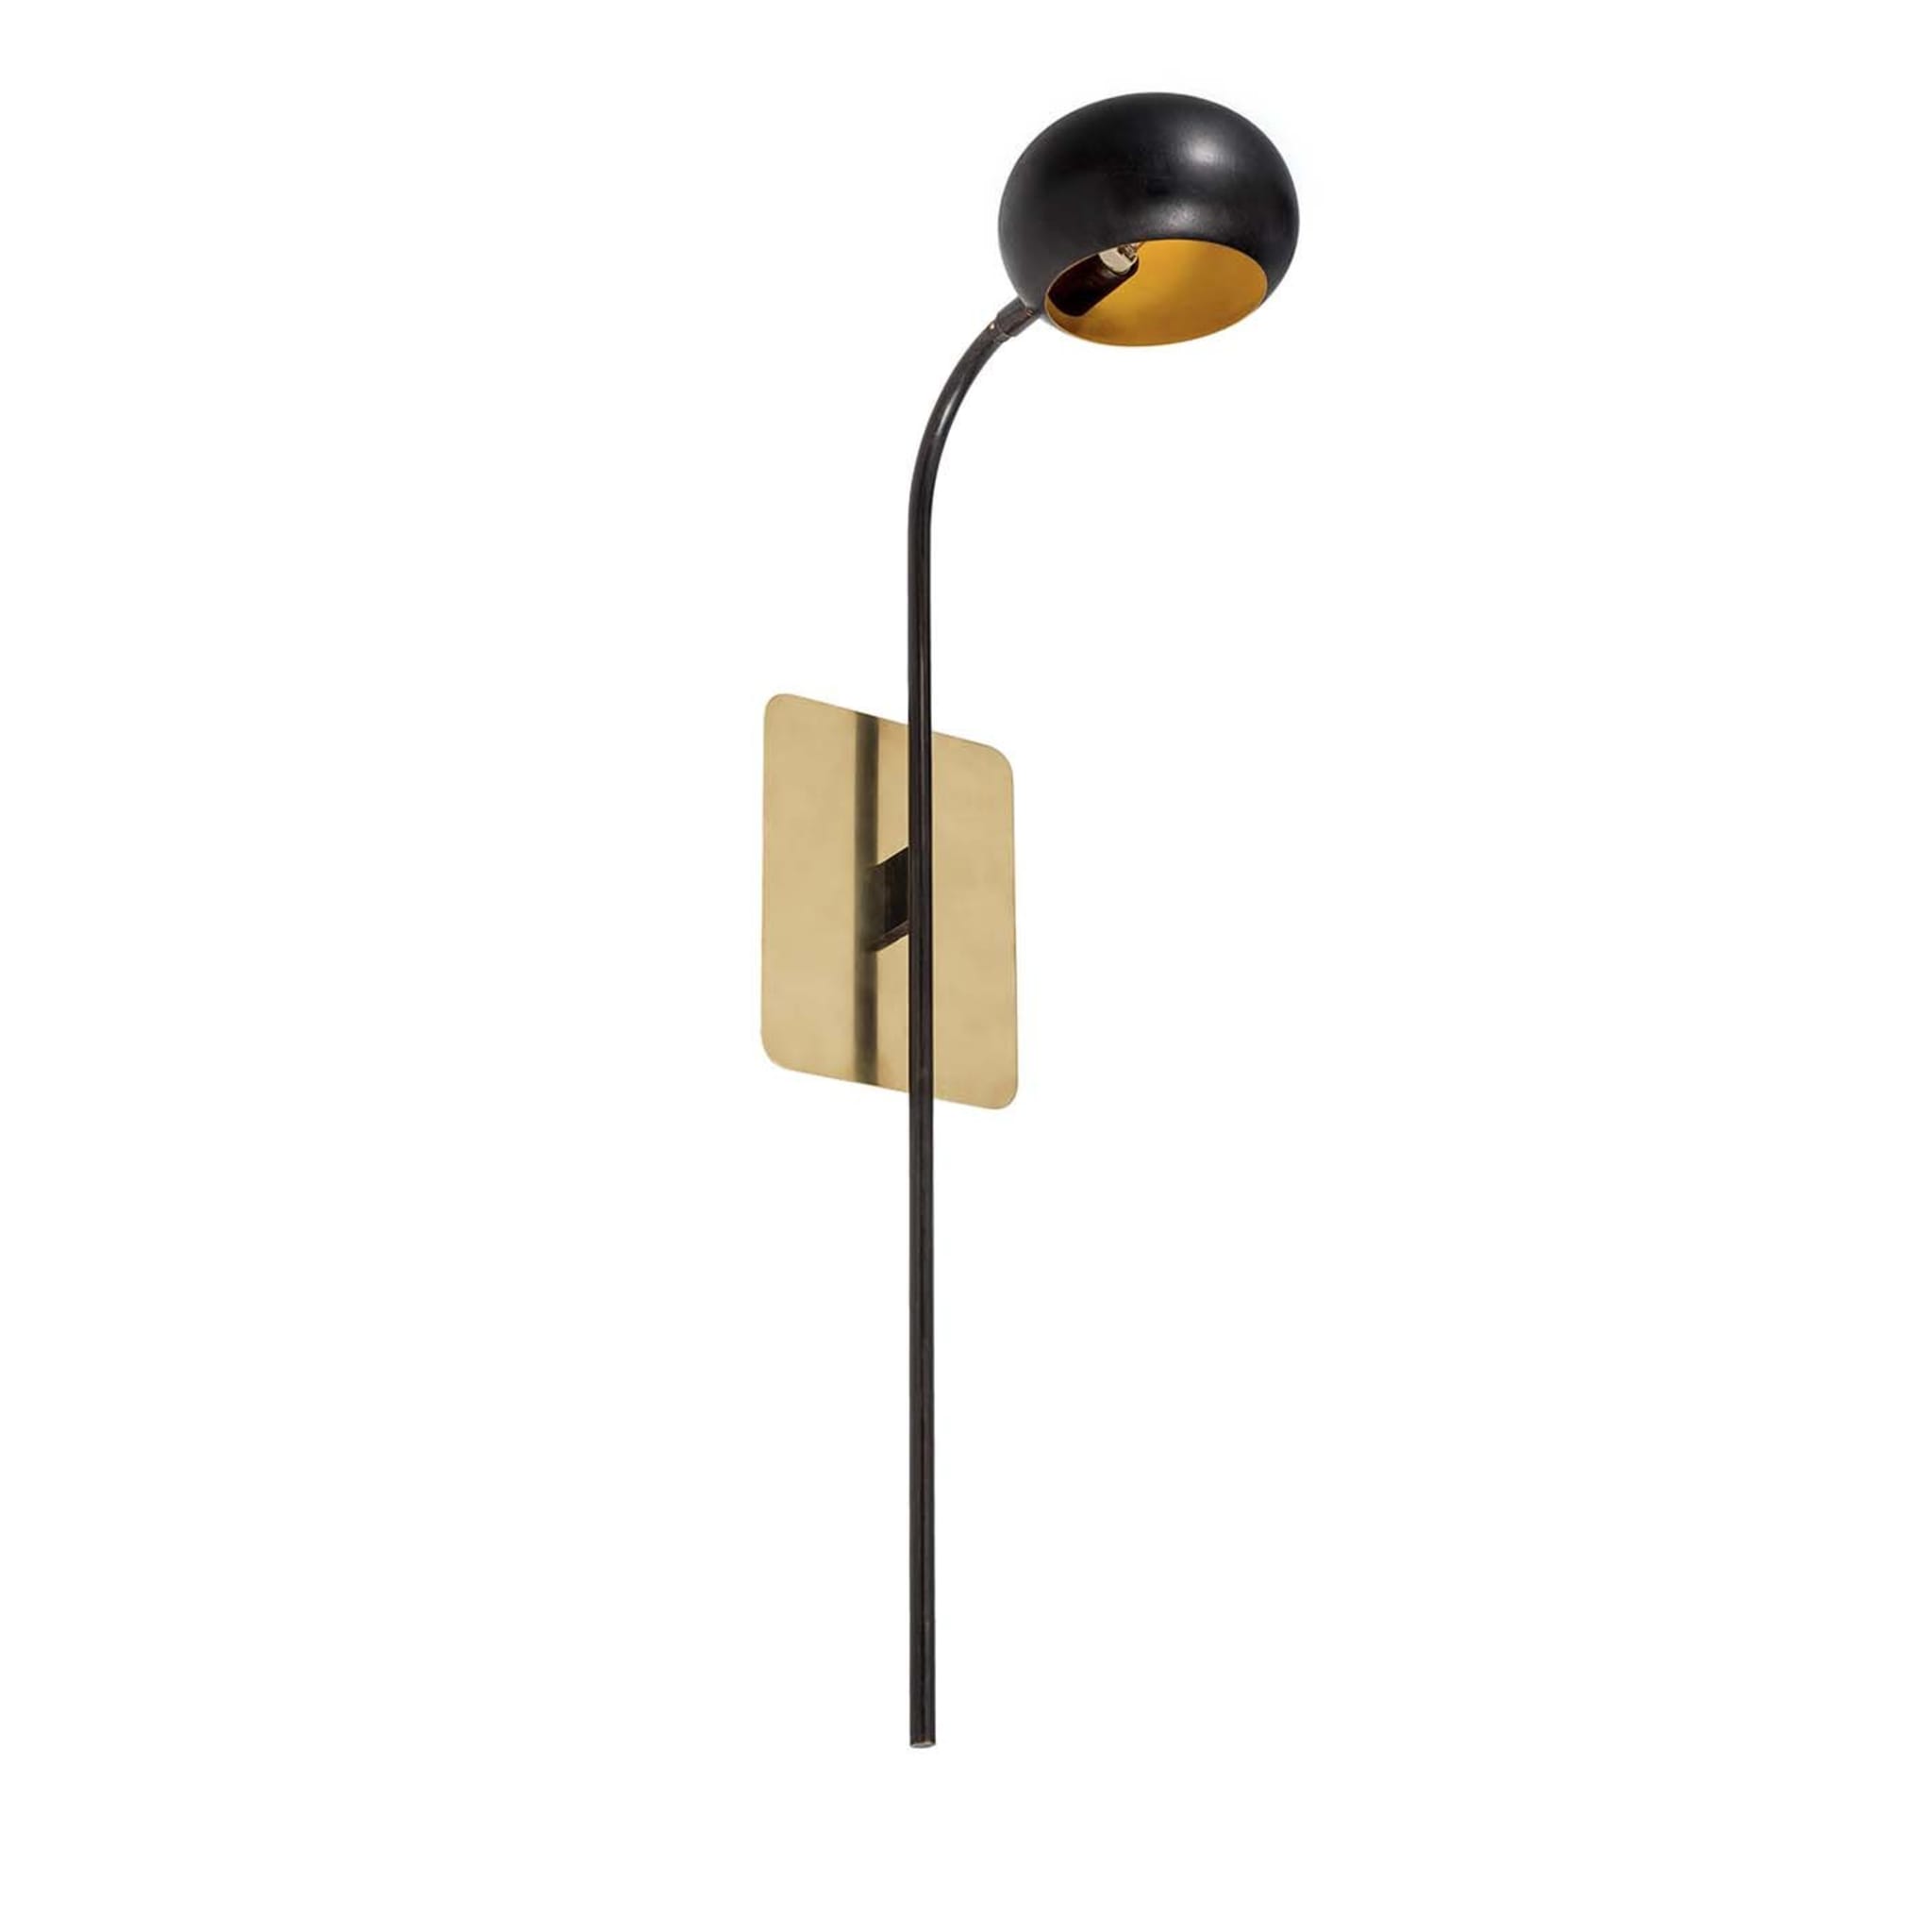 B'Tulip Black and Yellow Sconce - Main view